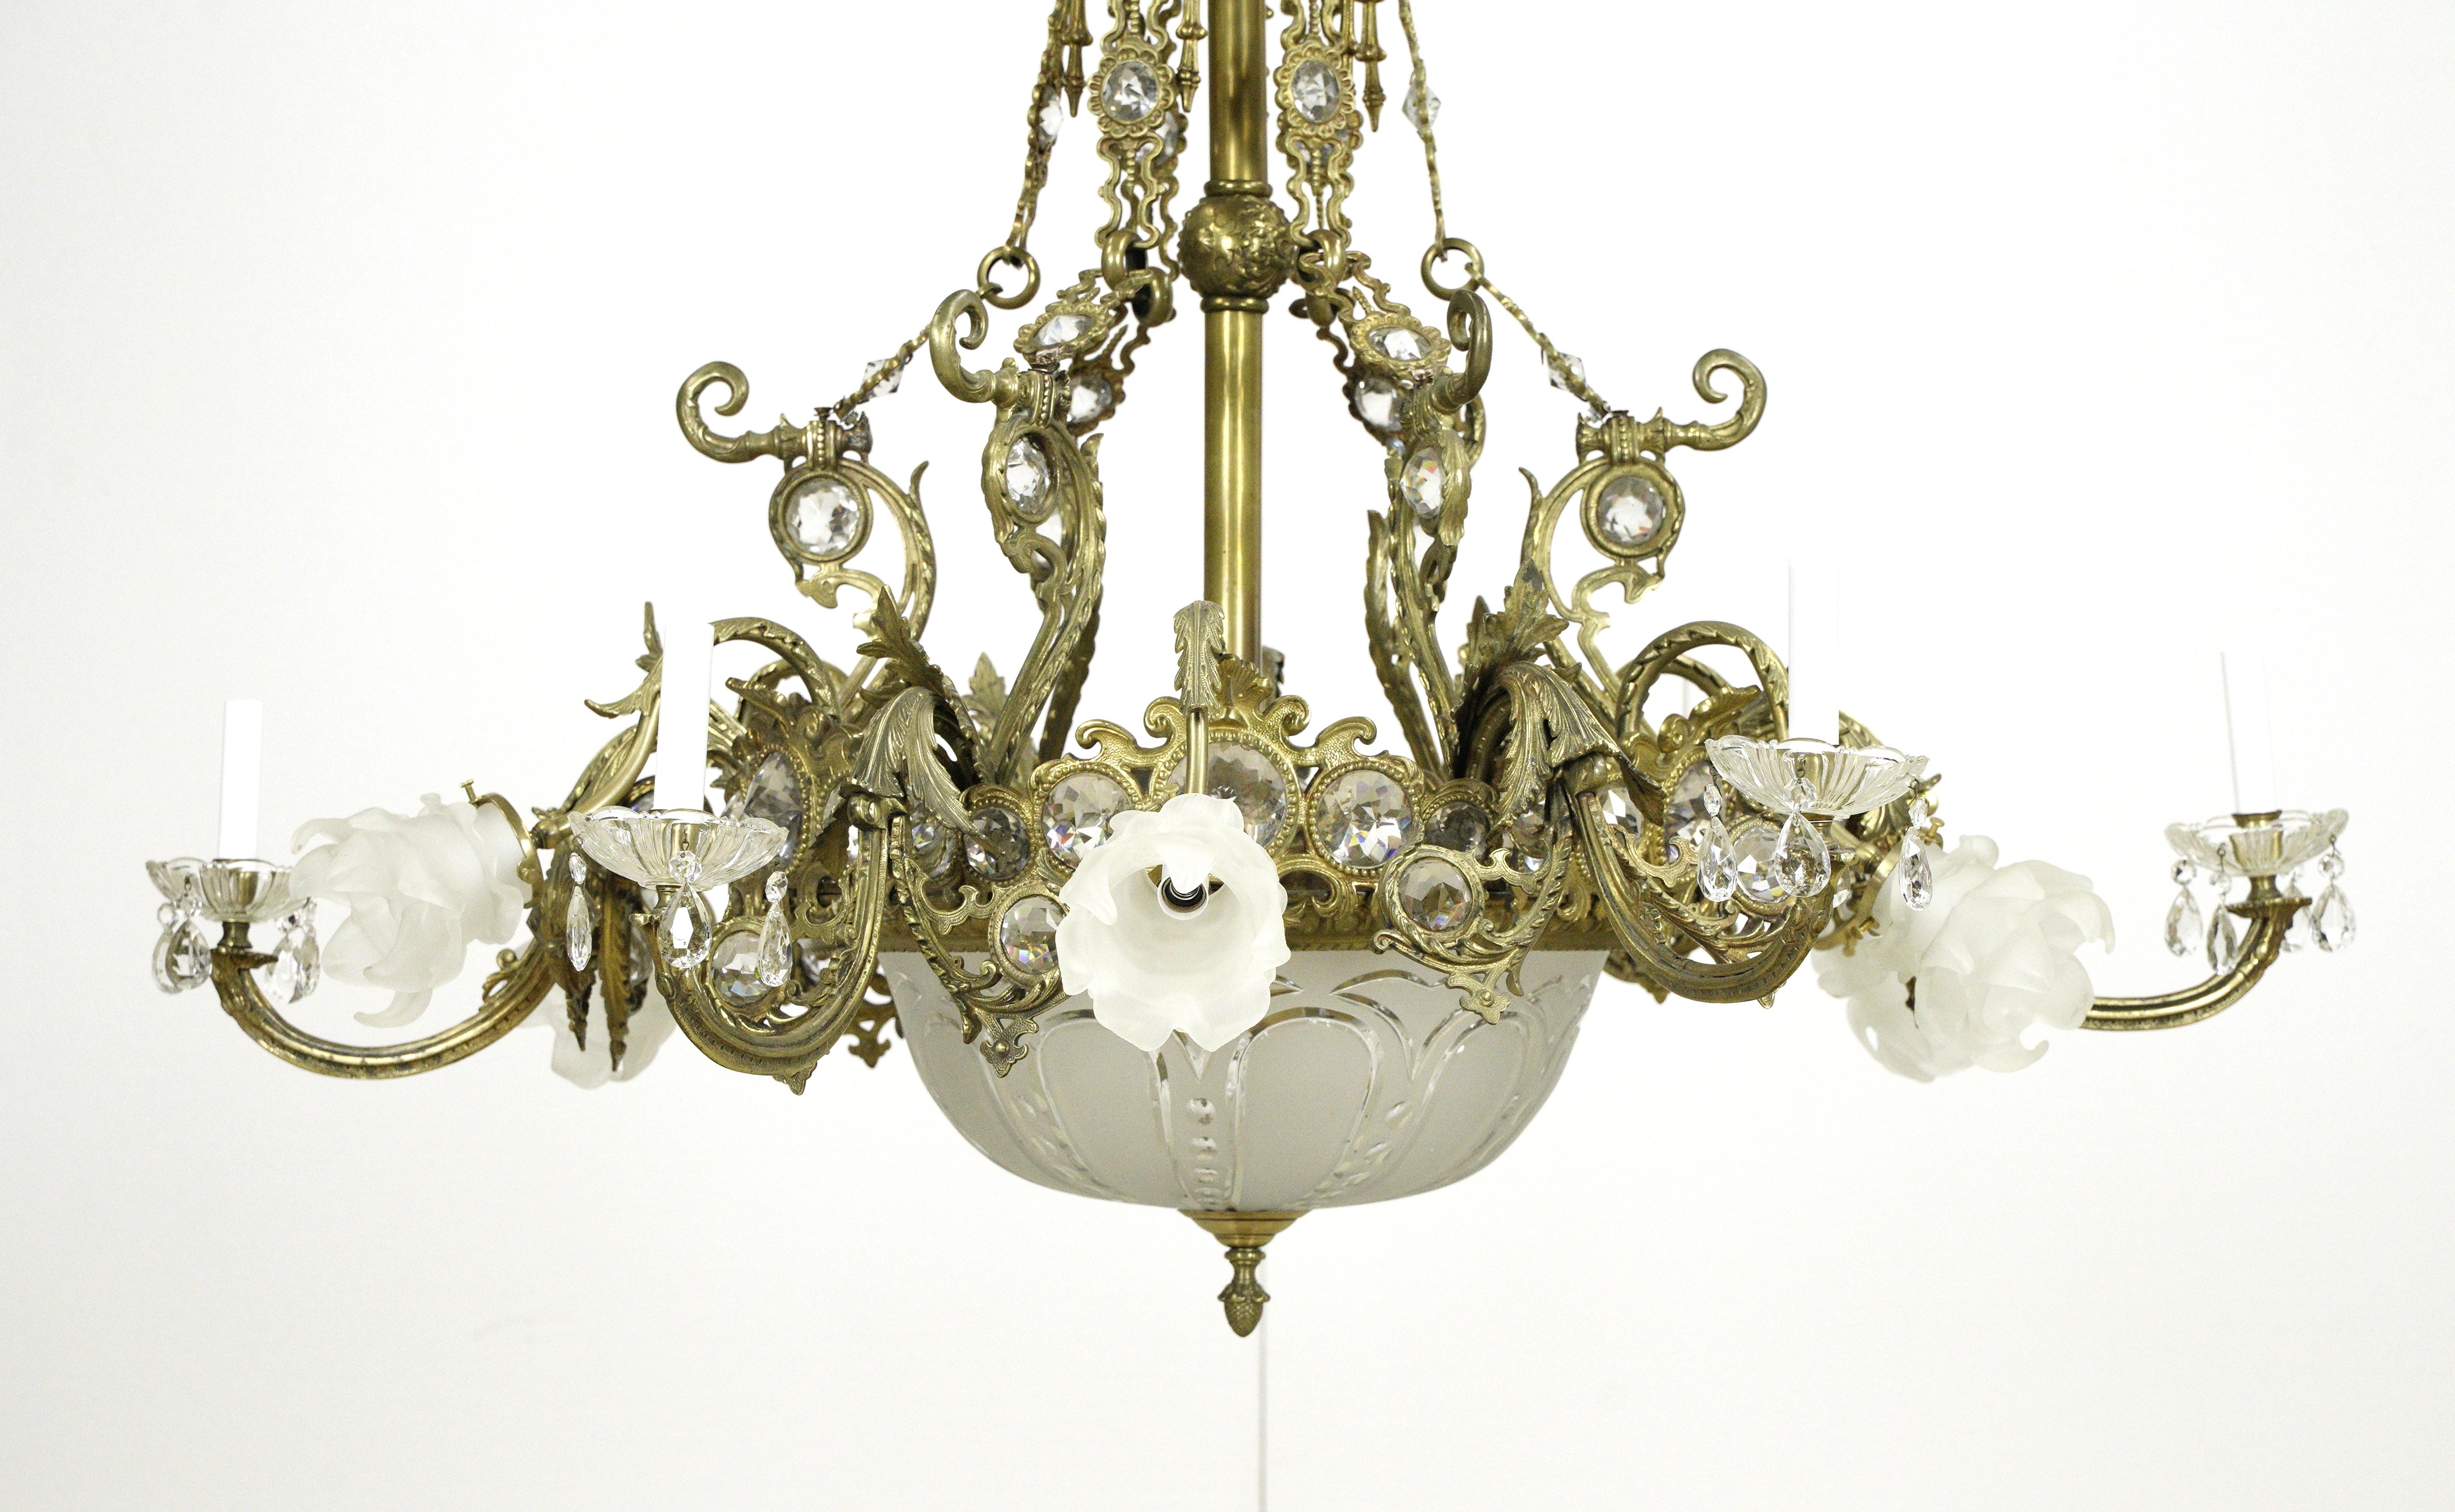 Highly ornate French bronze and crystal chandelier with an etched glass bowl and frosted glass floral shades suspended from a steel chain. This light requires 15 candelabra light bulbs. This light is wired and ready to ship. Good condition with